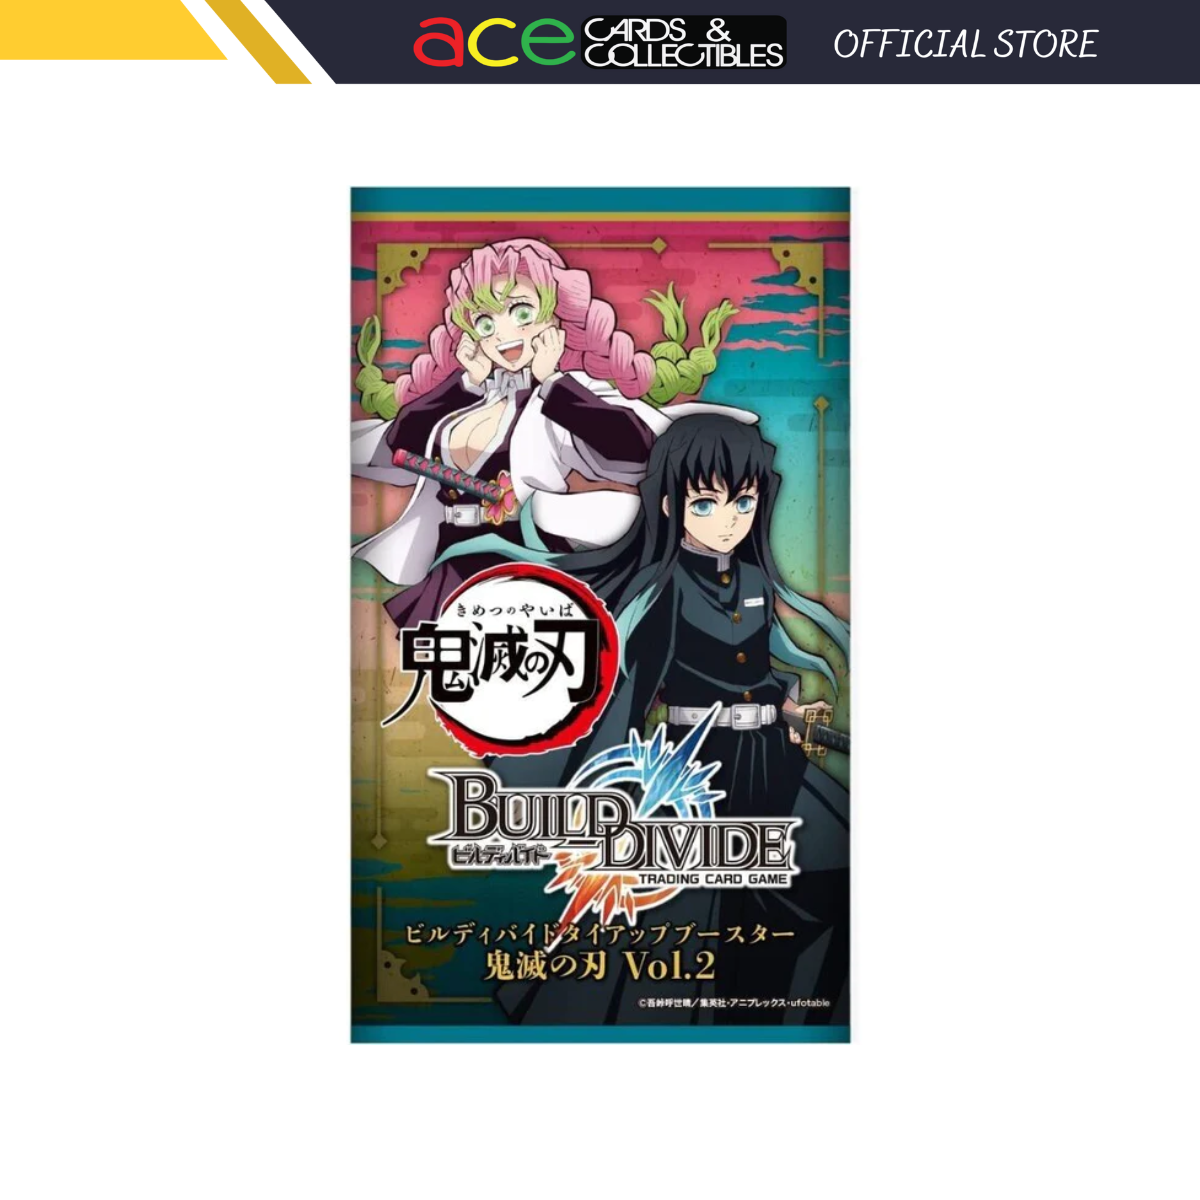 Build Divide Collaboration Booster &quot;Demon Slayer: Kimetsu no Yaiba&quot; Vol. 2 [BD-KM-TB2] (Japanese)-Booster Pack-Aniplex-Ace Cards &amp; Collectibles